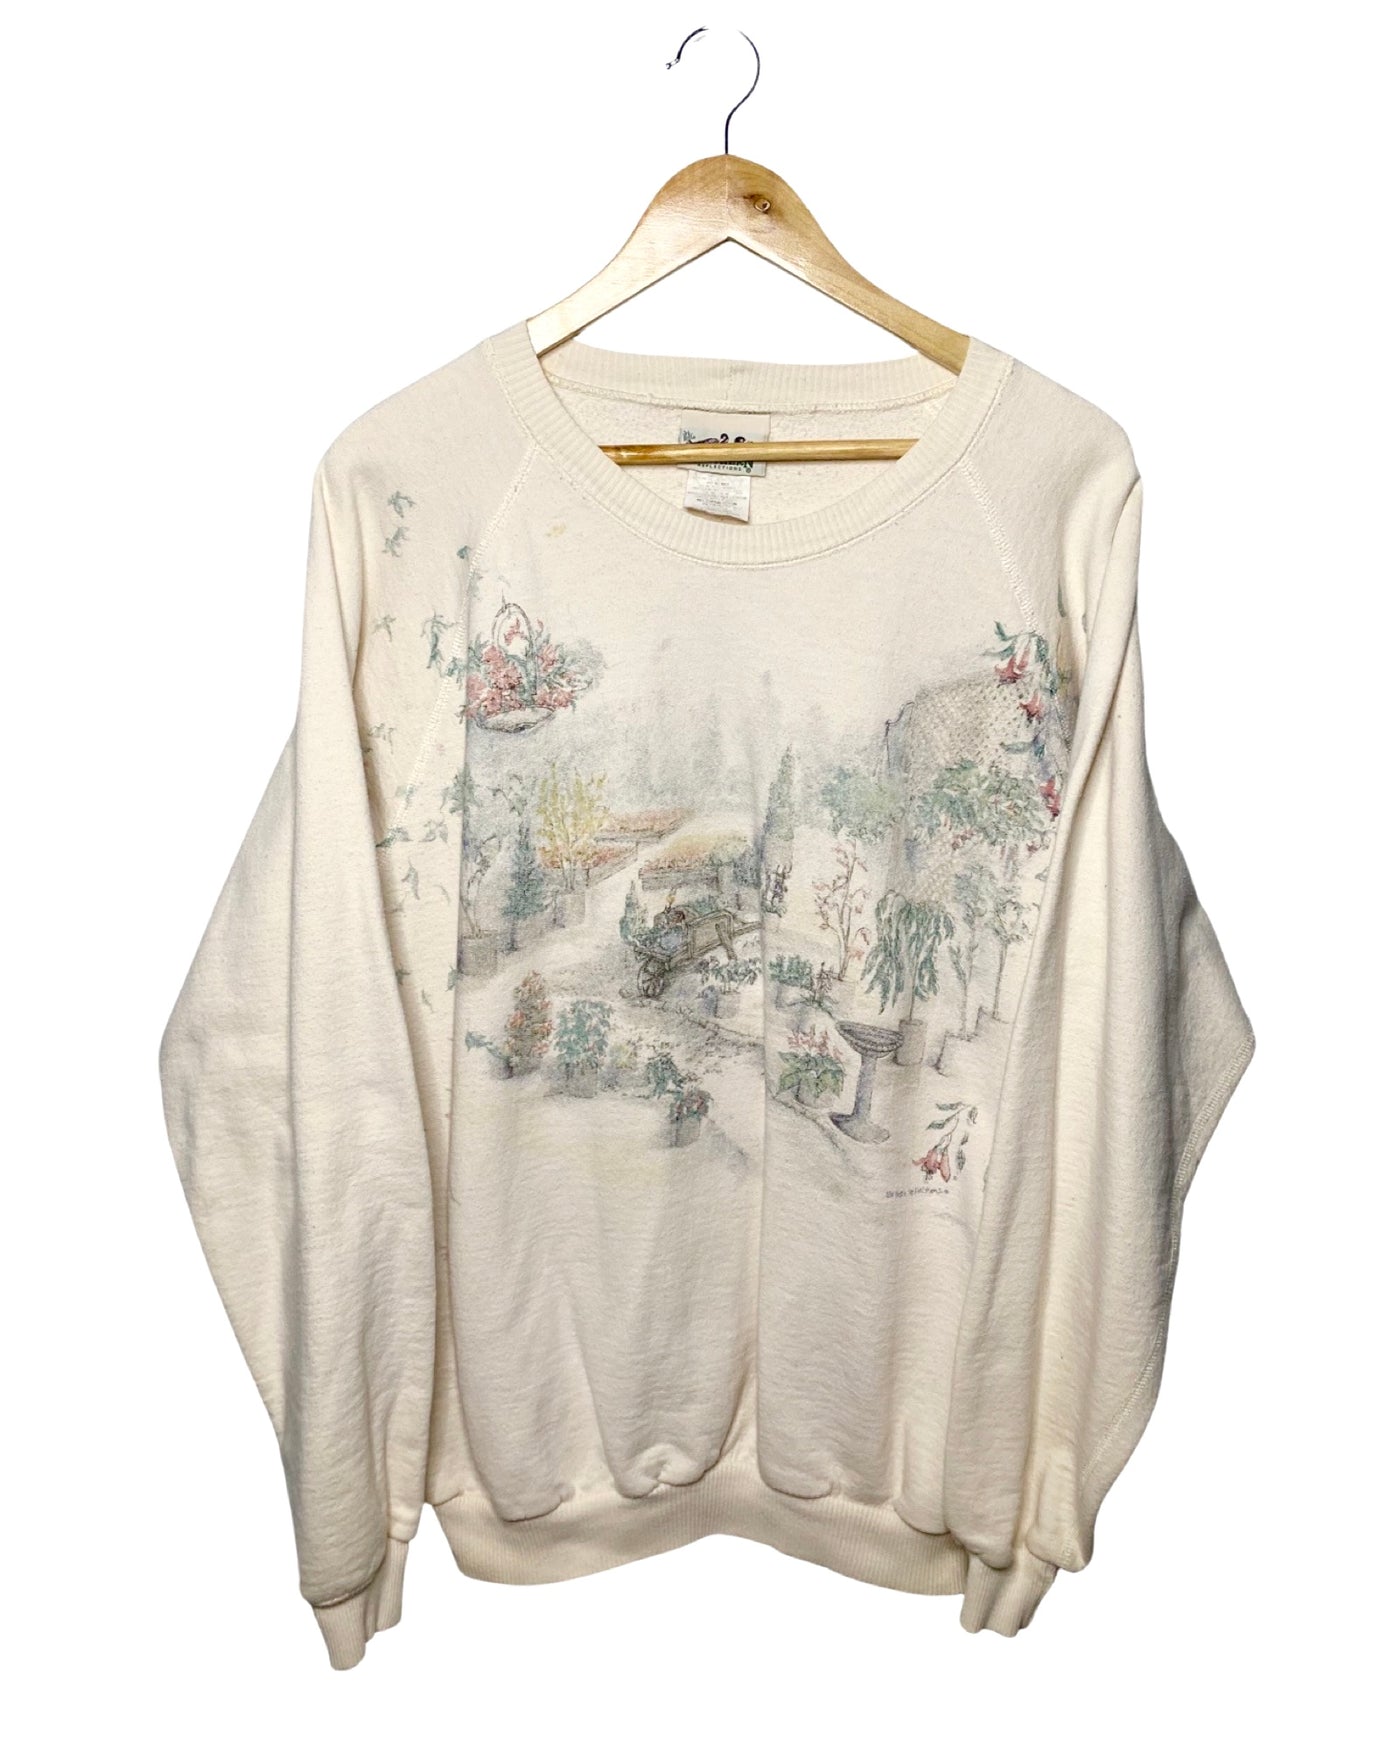 Vintage 90s Northern Reflections All Over Print Crewneck